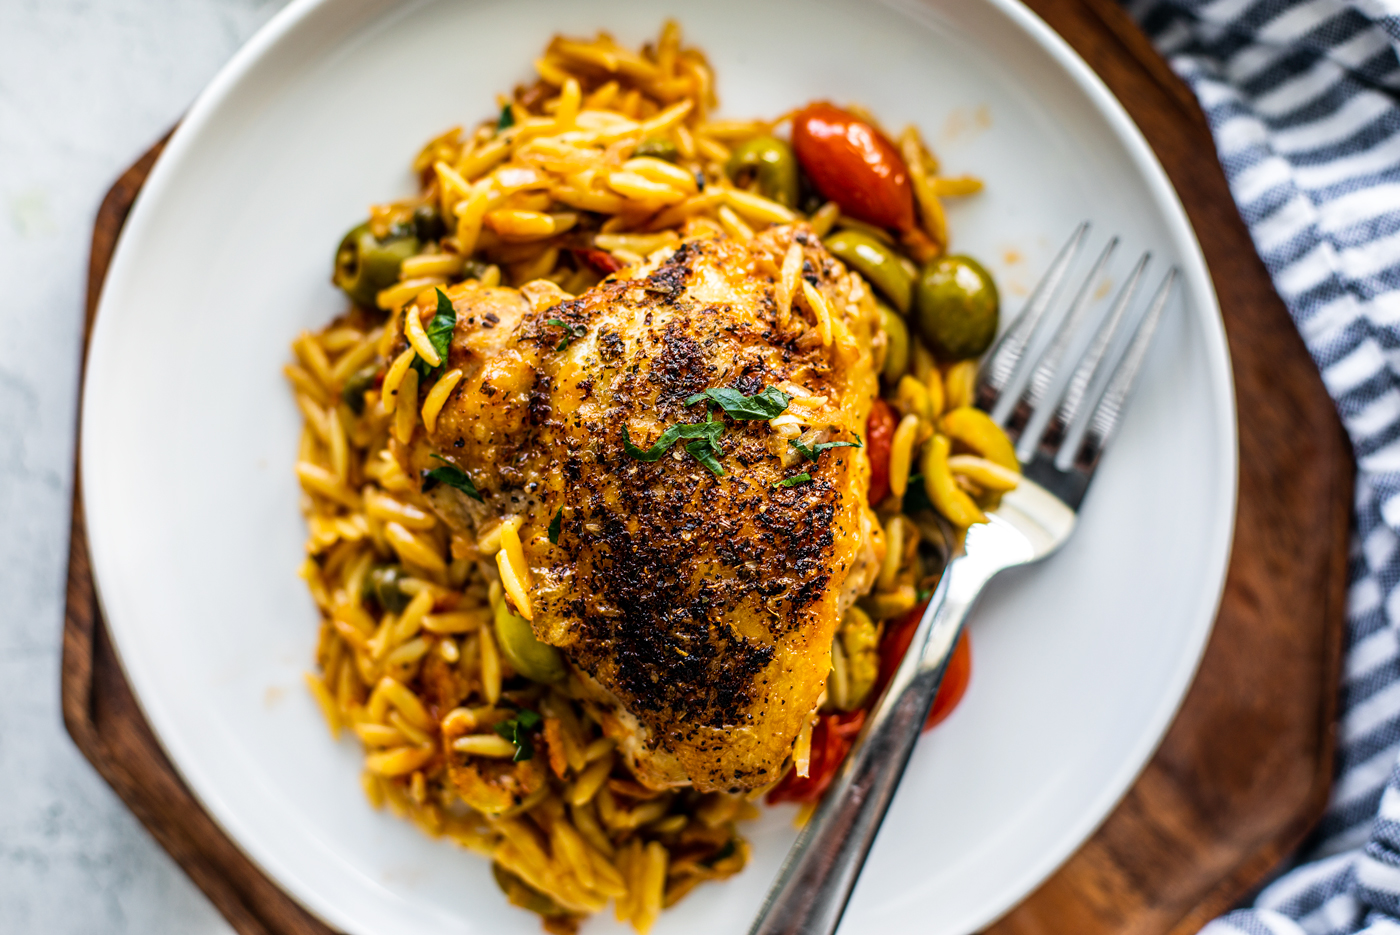 Overhead shot of plateful of orzo with crispy chicken on top.